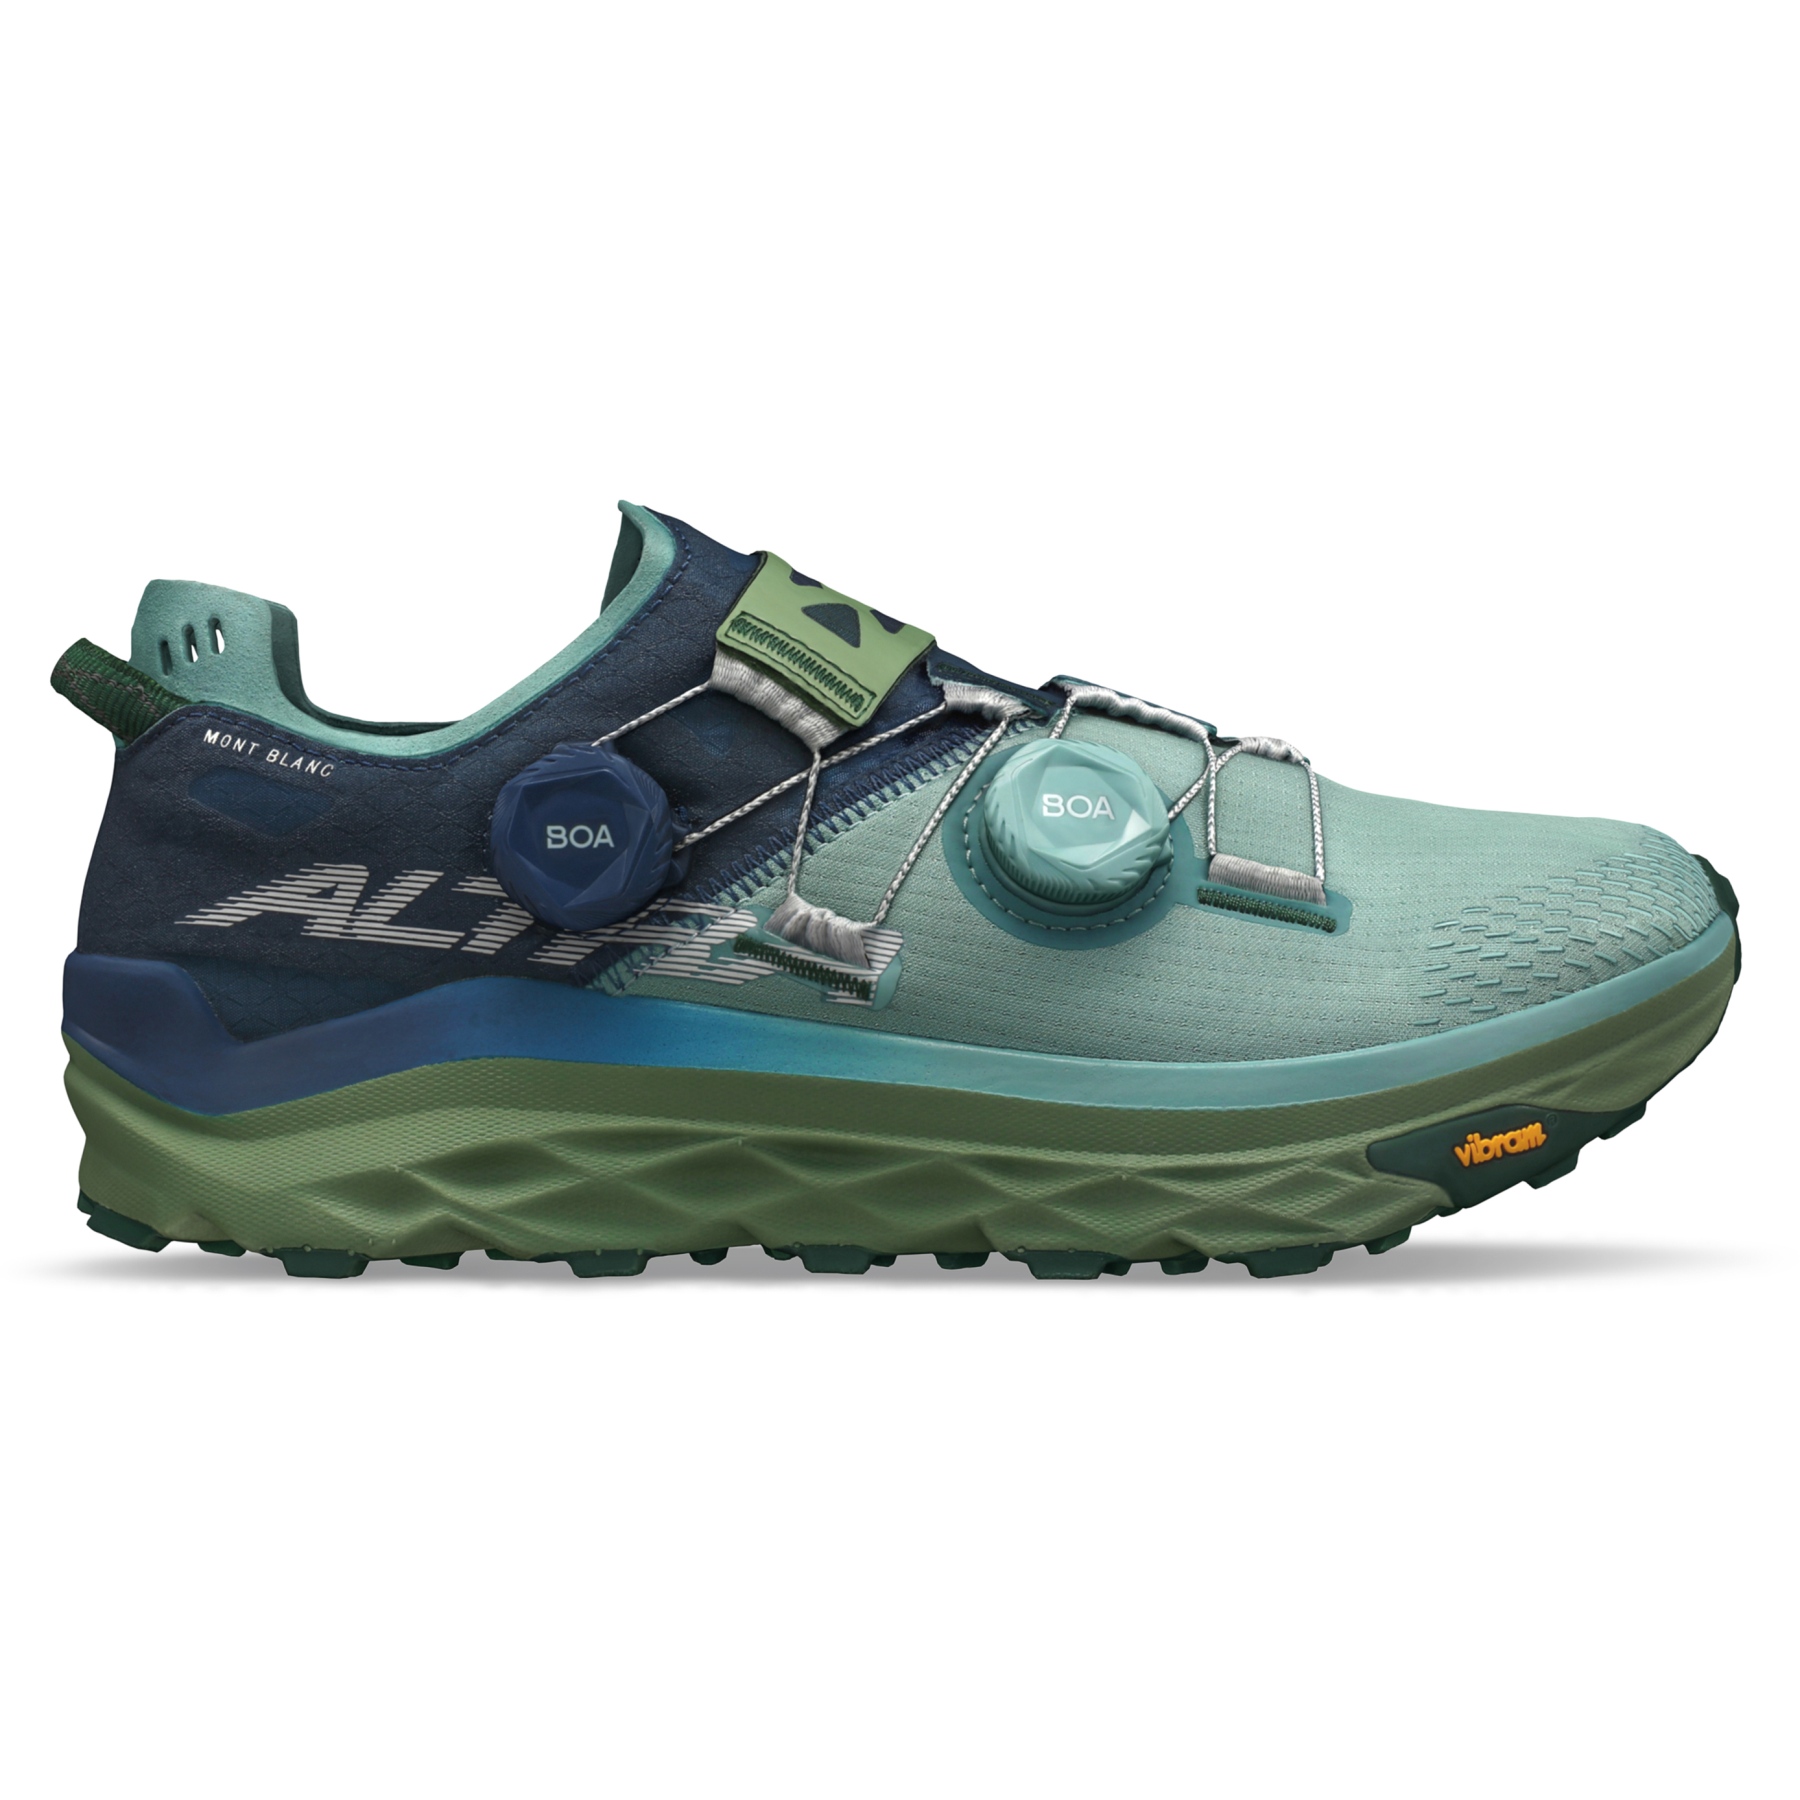 Picture of Altra Mont Blanc BOA® Trail Running Shoes Men - Blue/Green